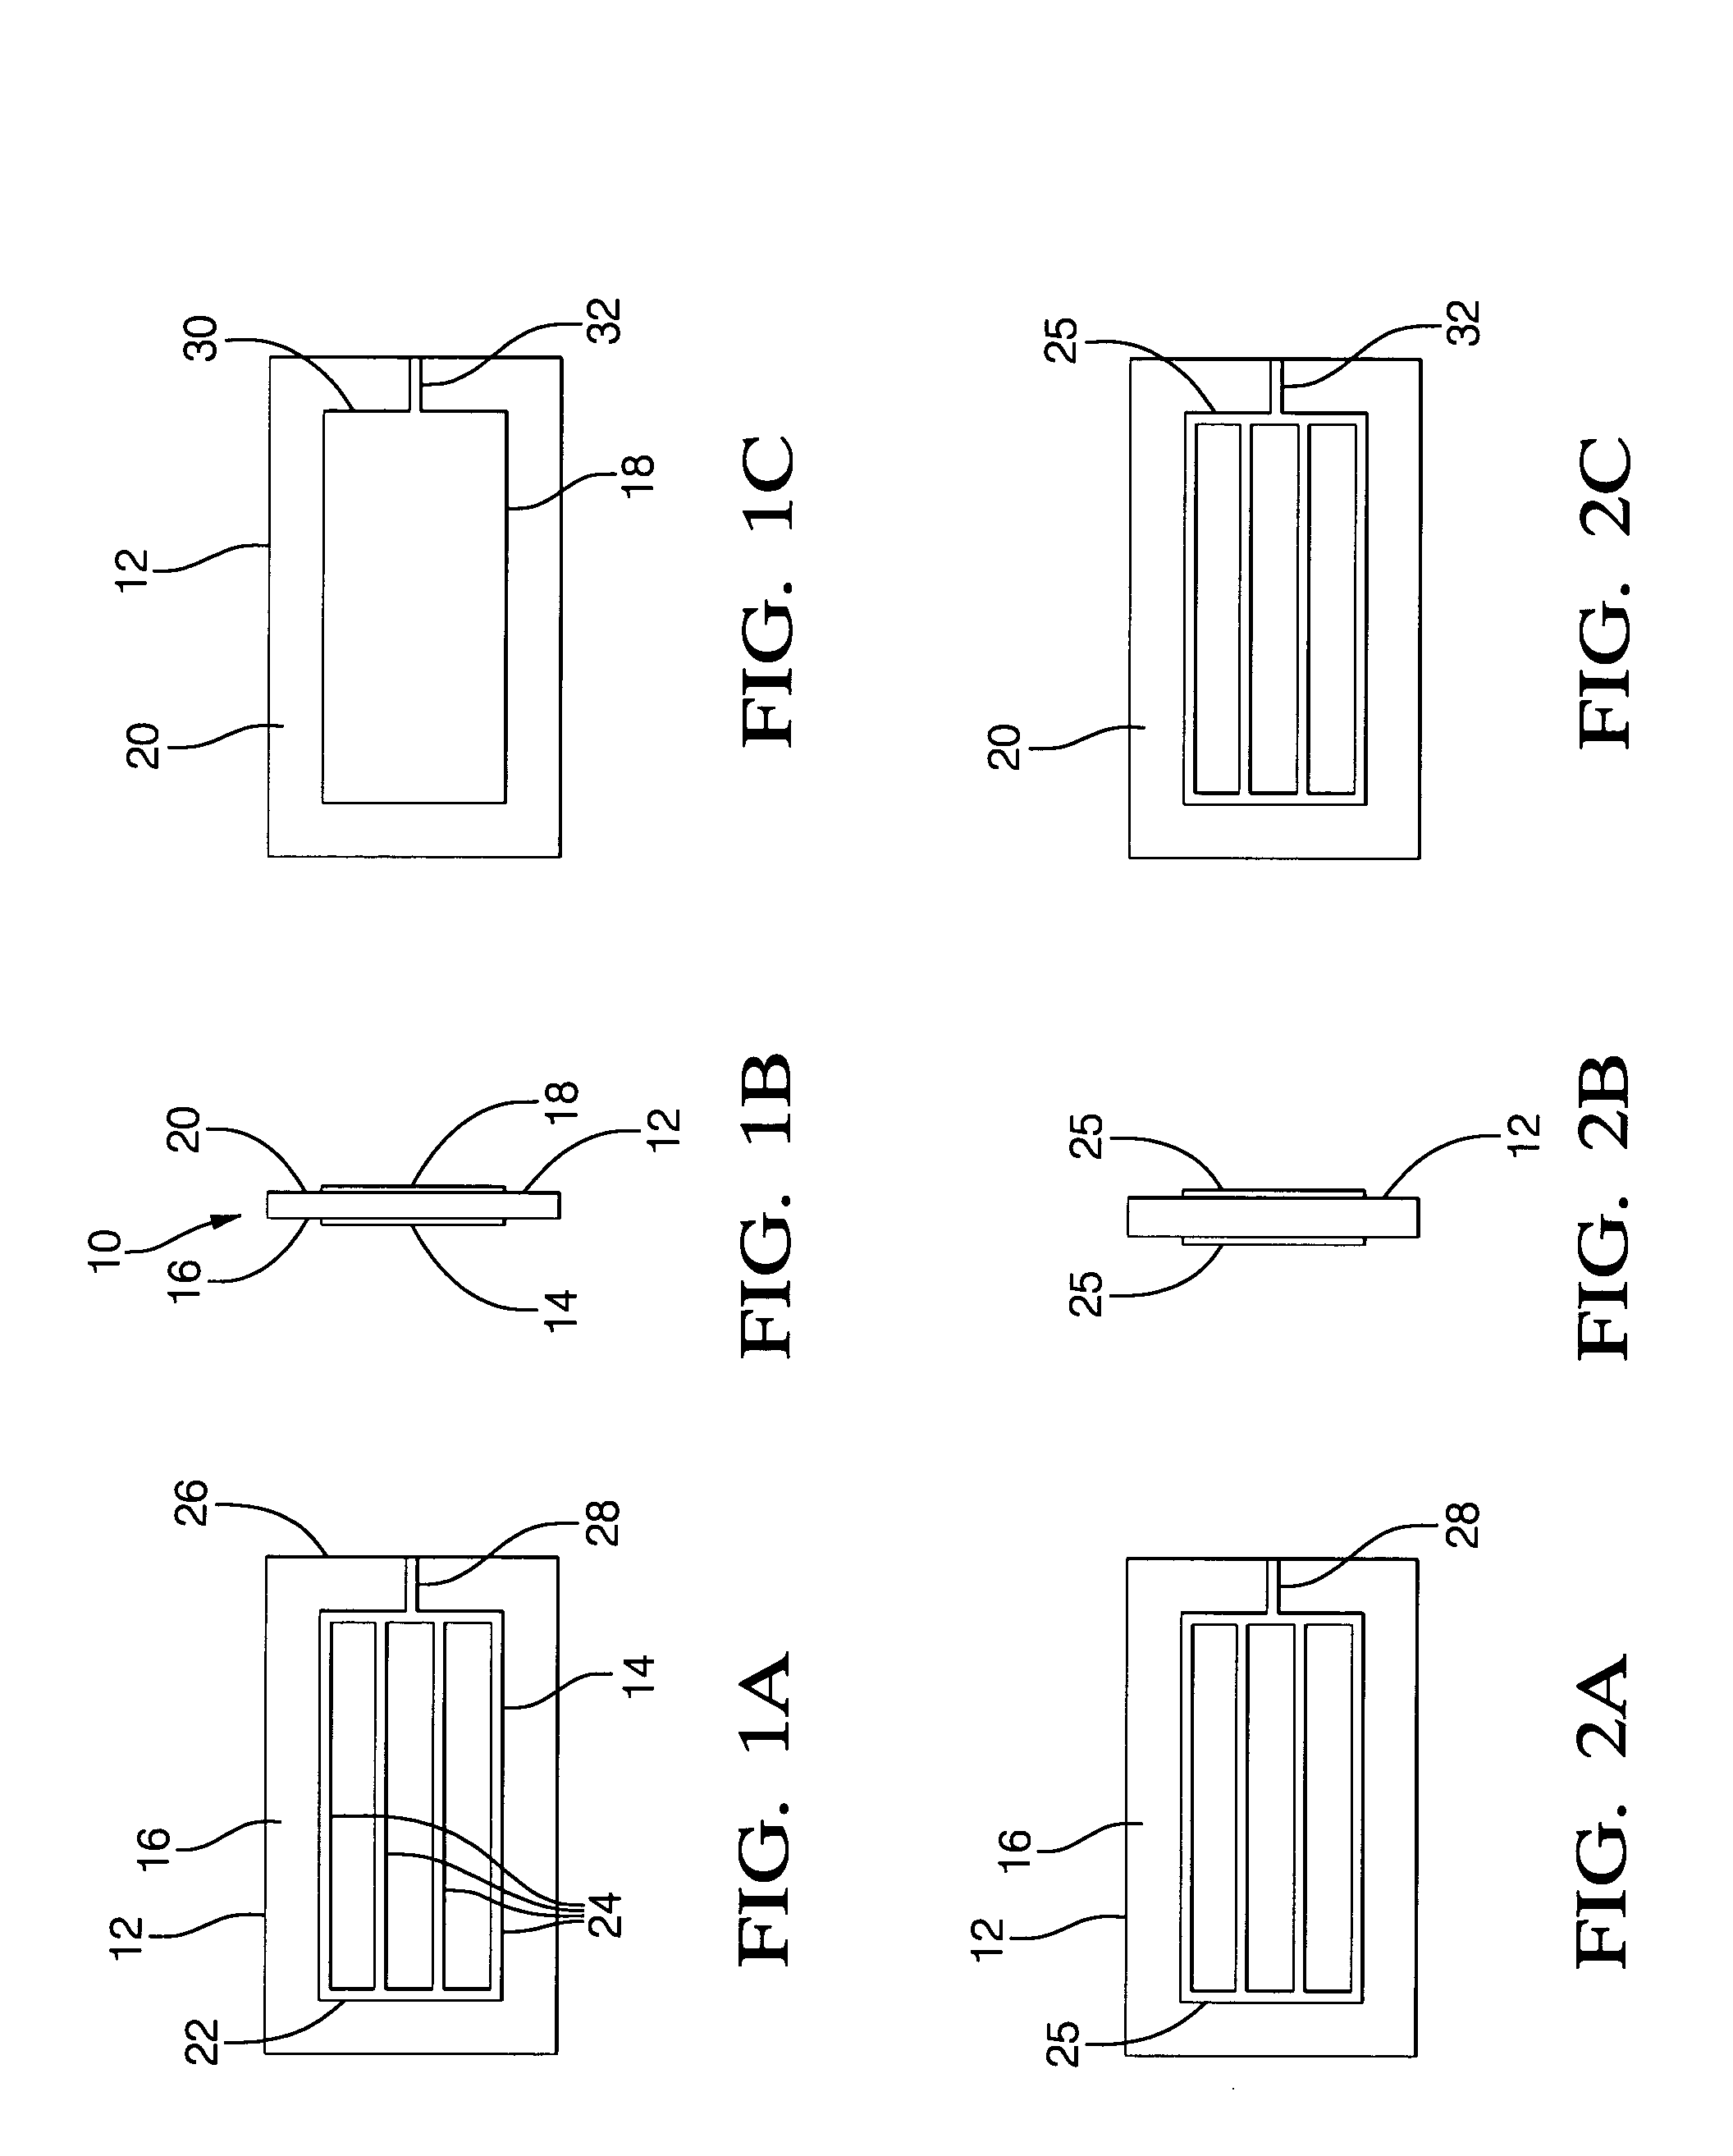 Surface discharge non-thermal plasma reactor and method